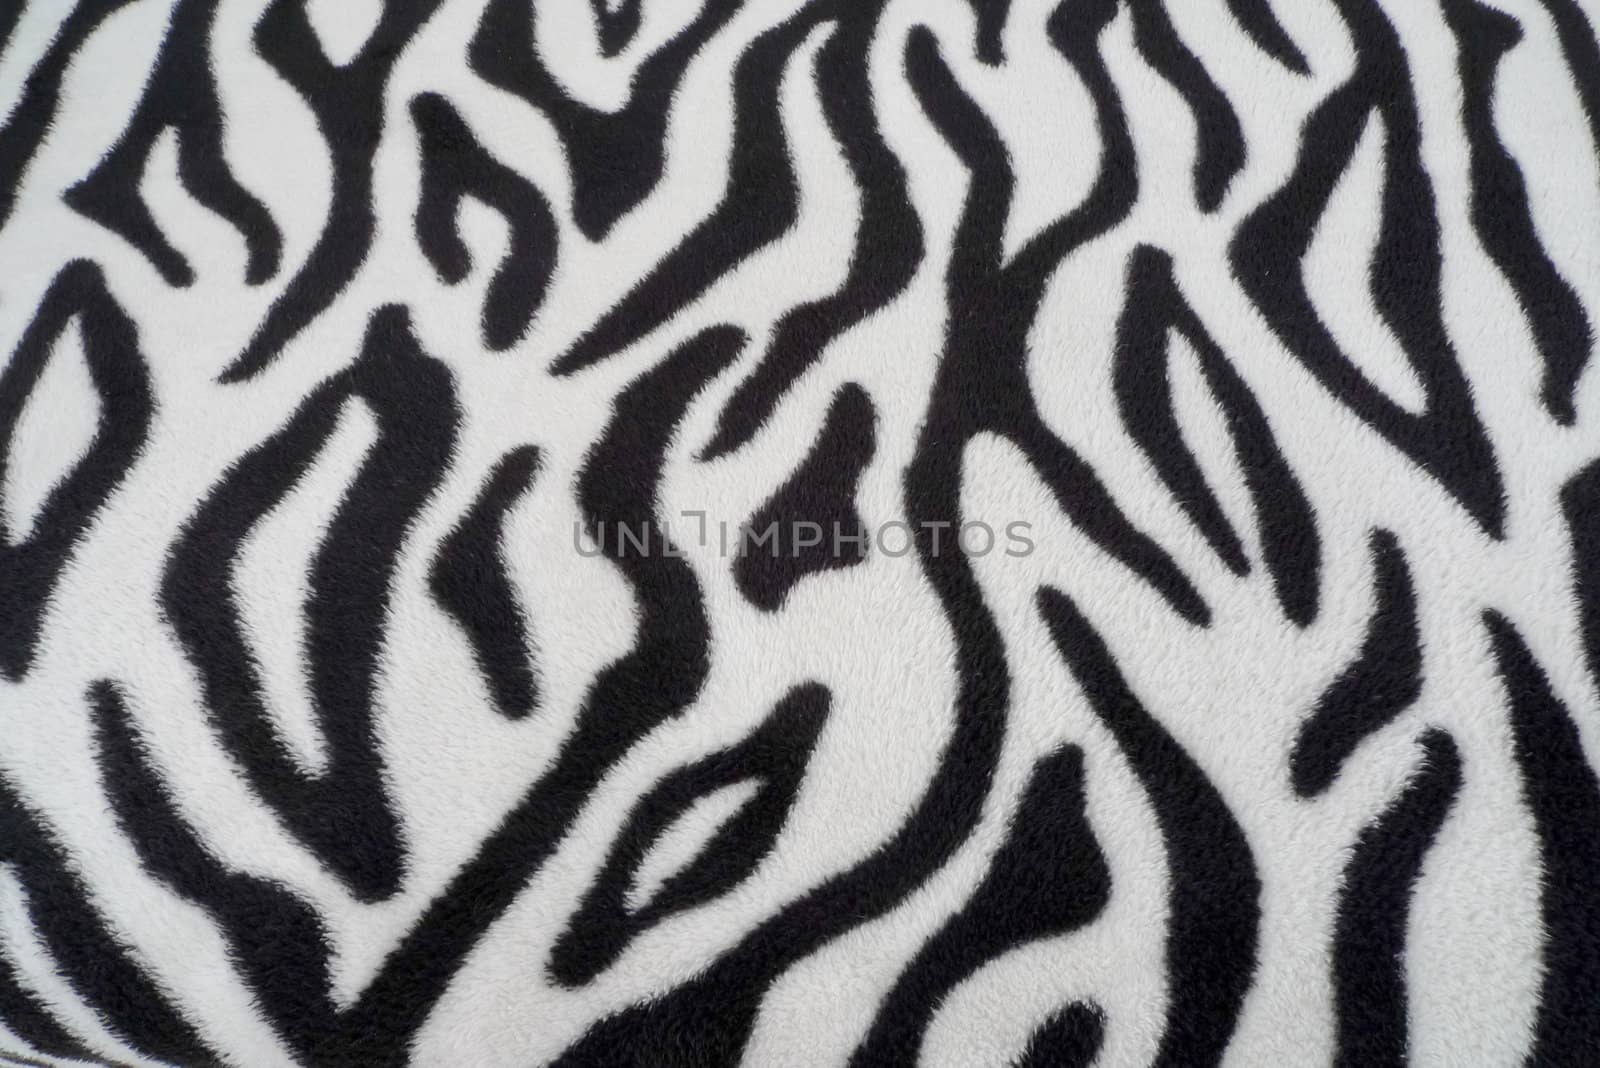 zebra texture Black and White by hsin0407